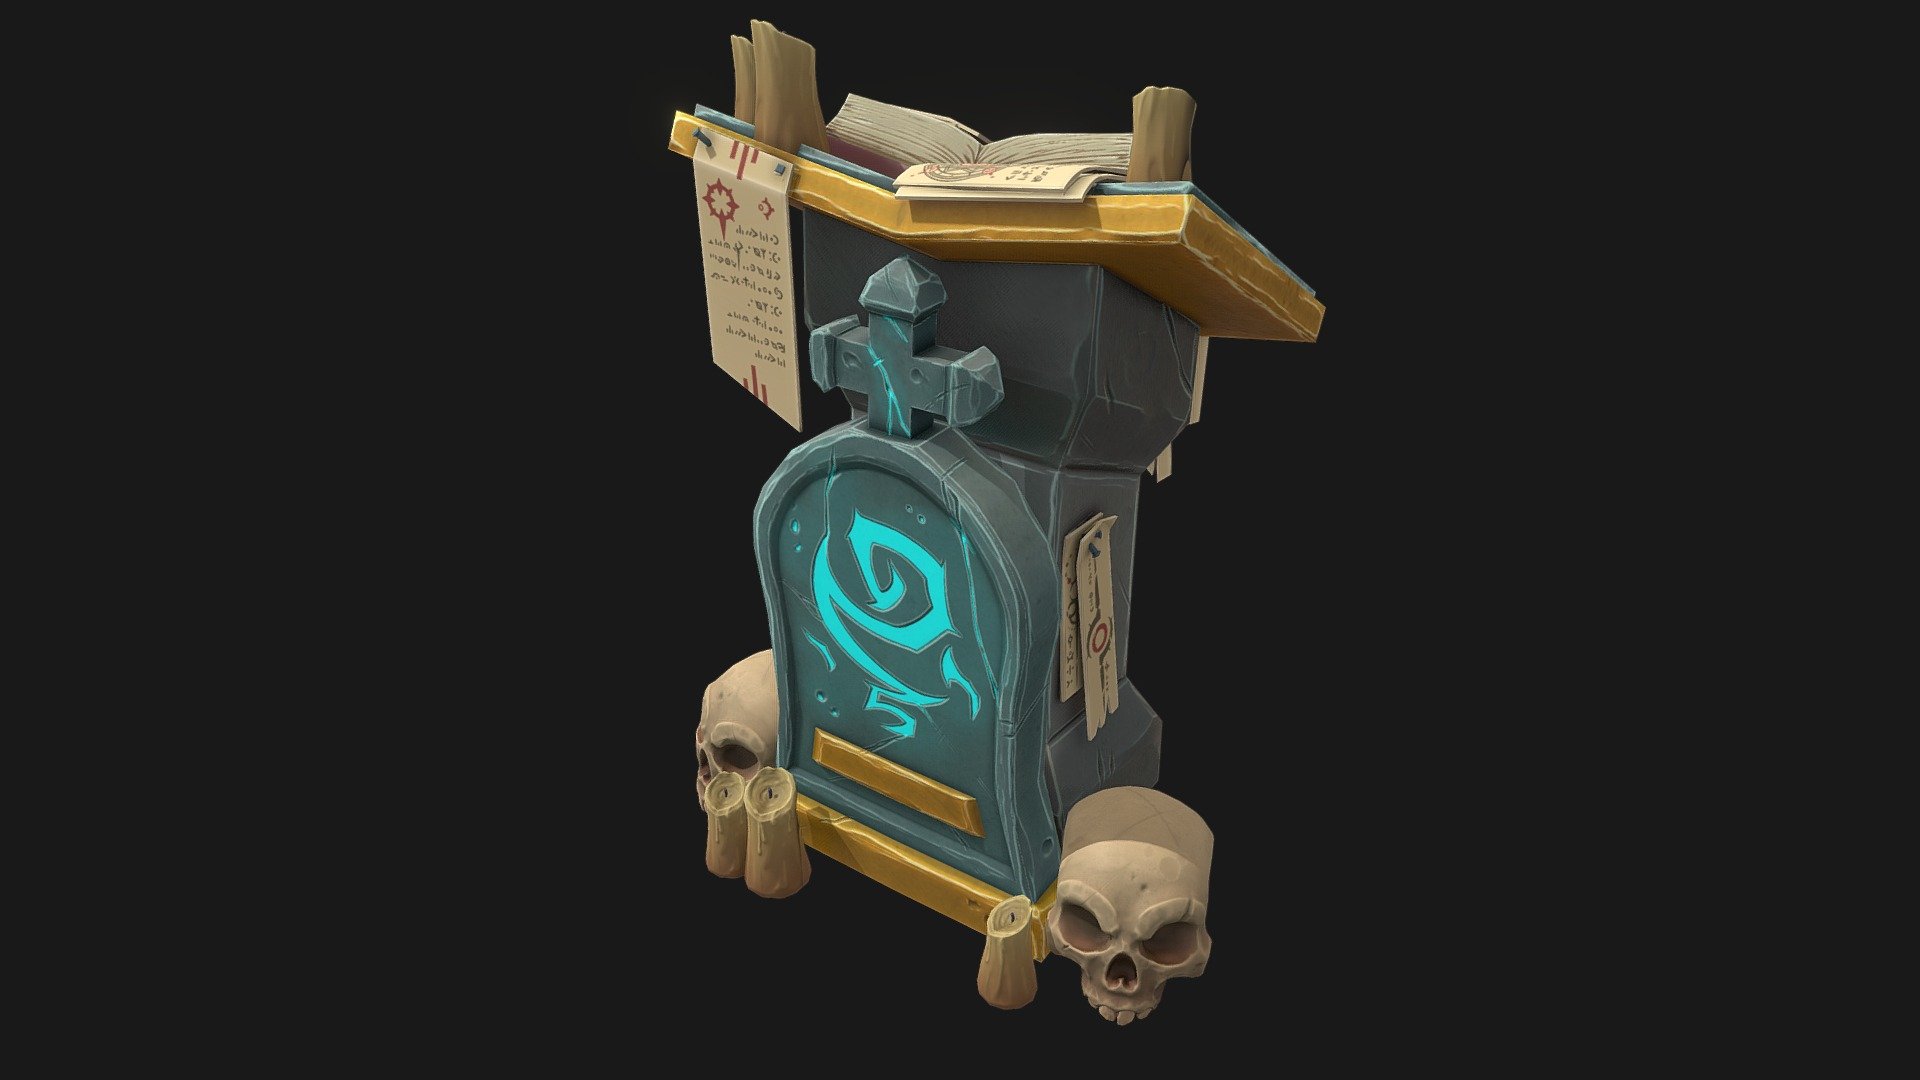 Book altar asset for the graveyard asset pack I’m working on.

All done with blender, Zbrush and substance painter 3d model